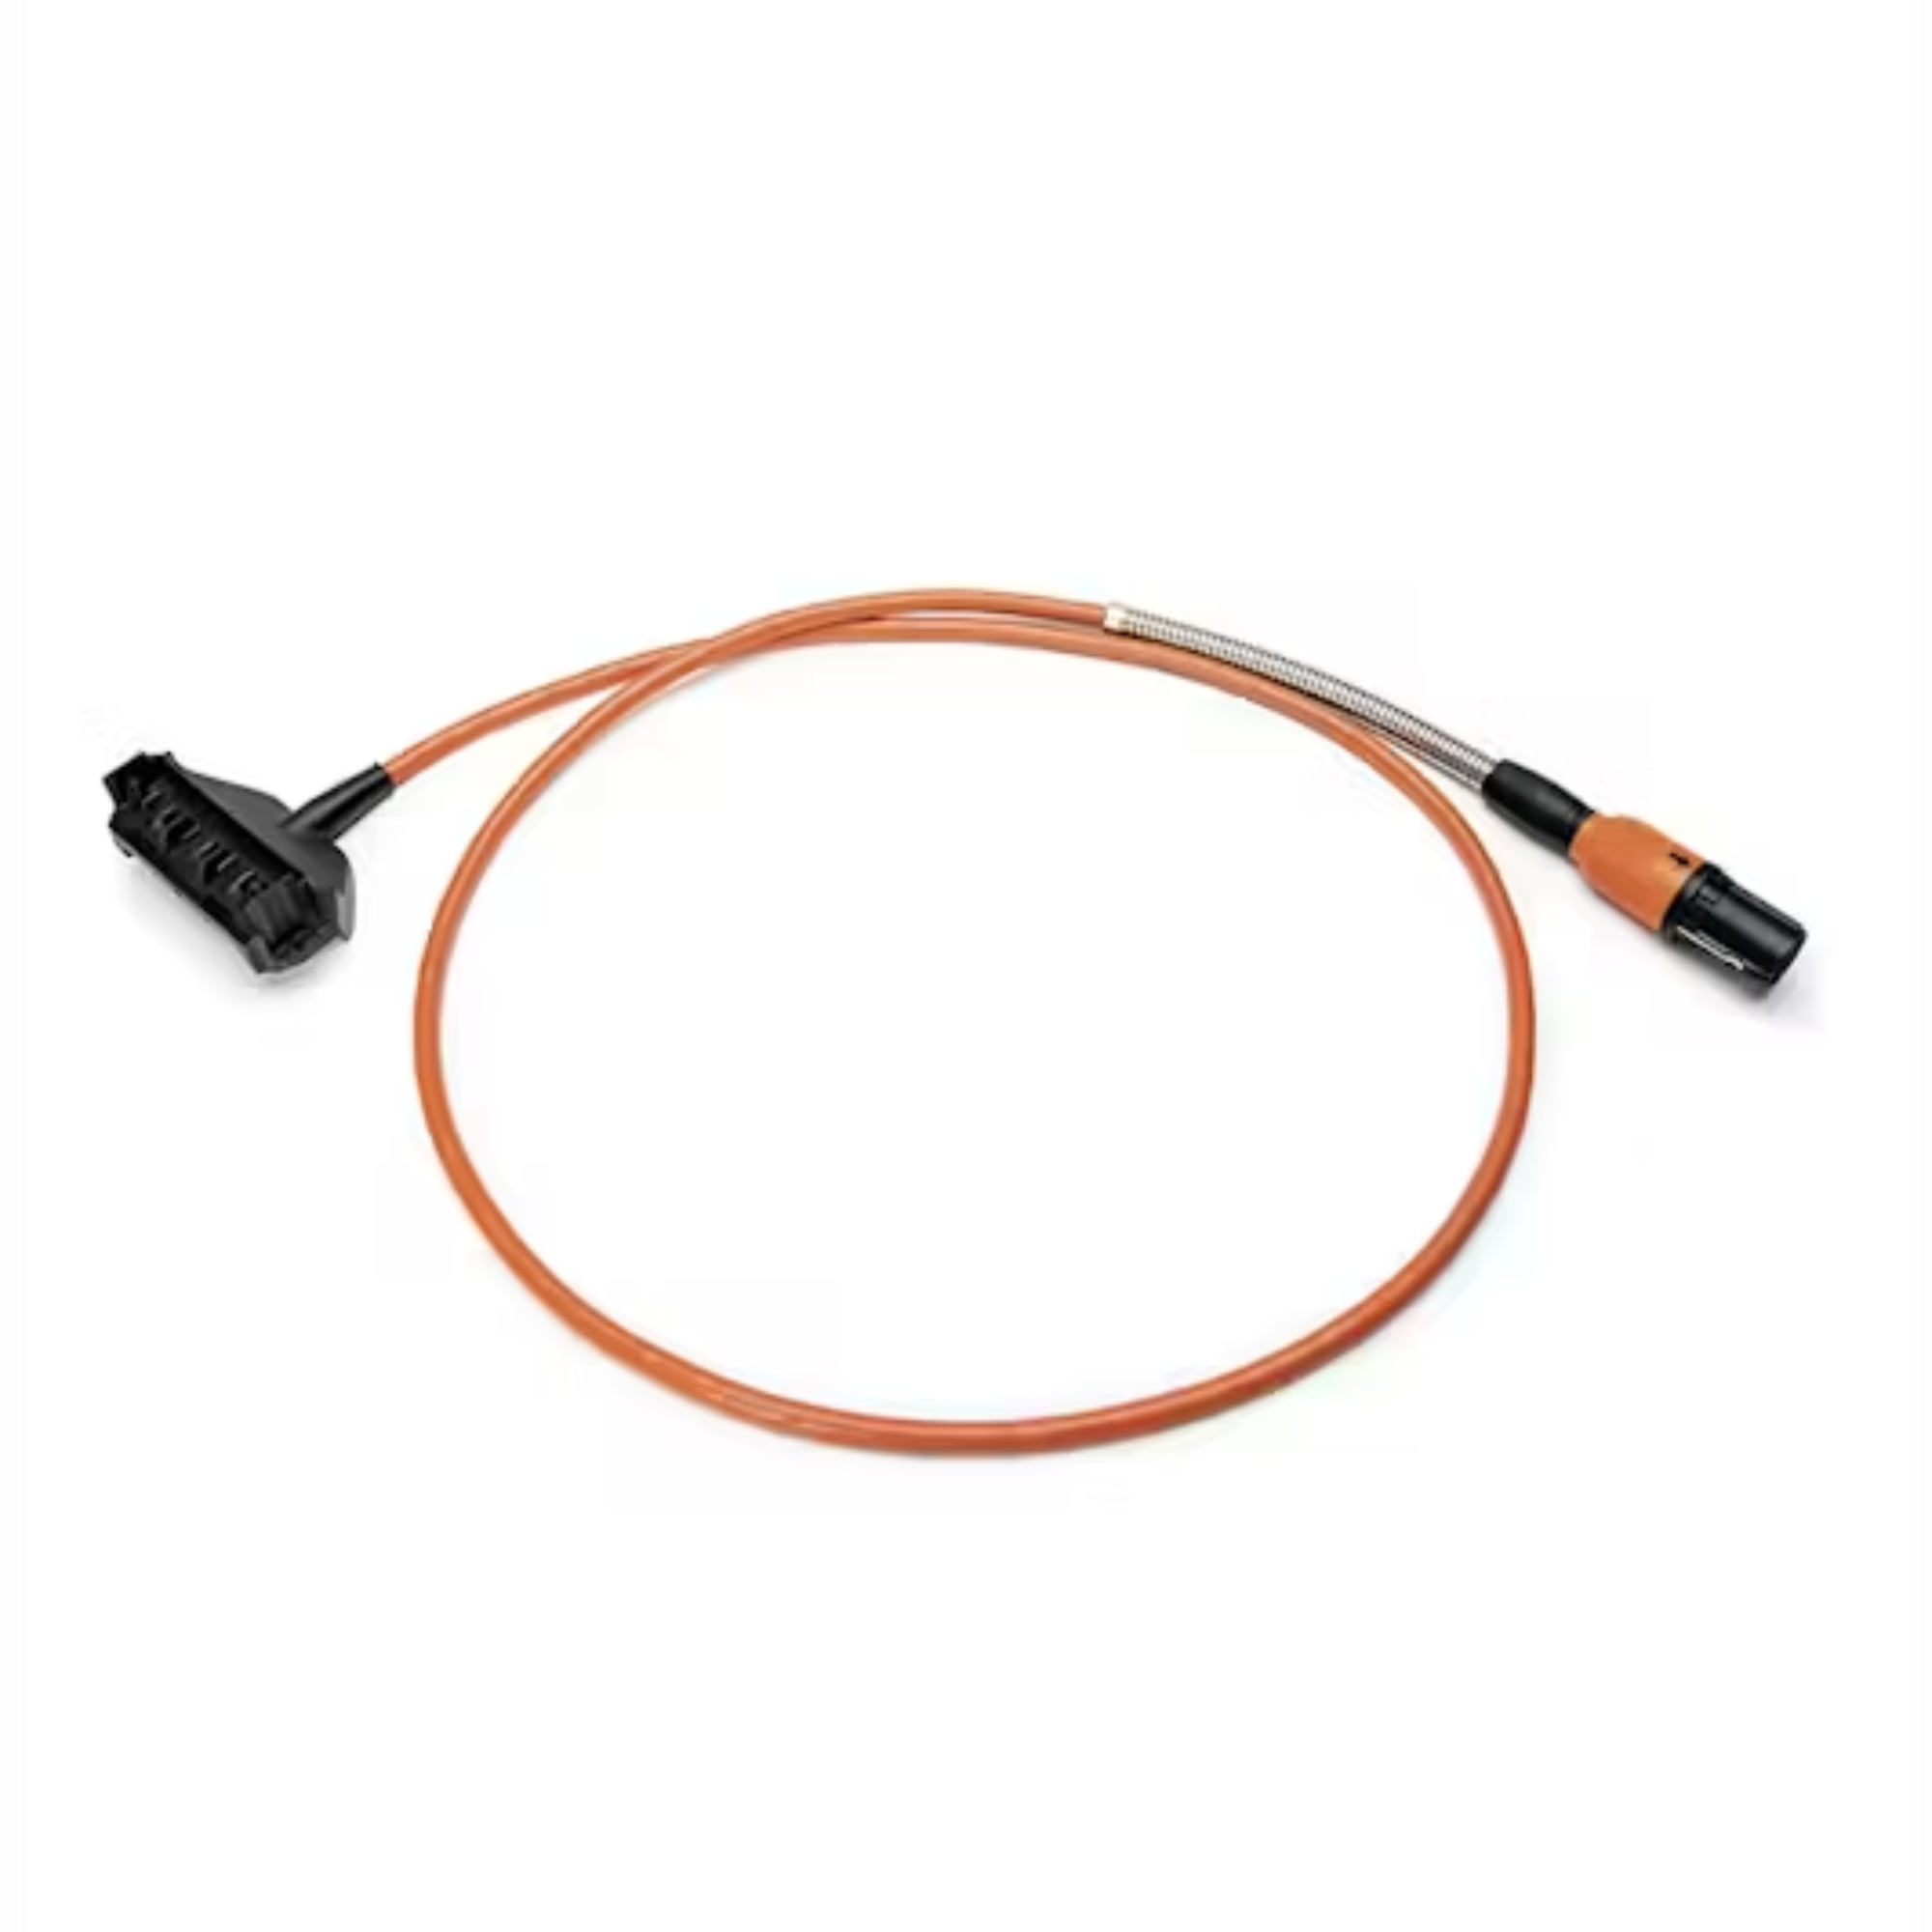 Stihl AR 2000 L & AR 3000 L Connecting Cable | 4871 440 2000